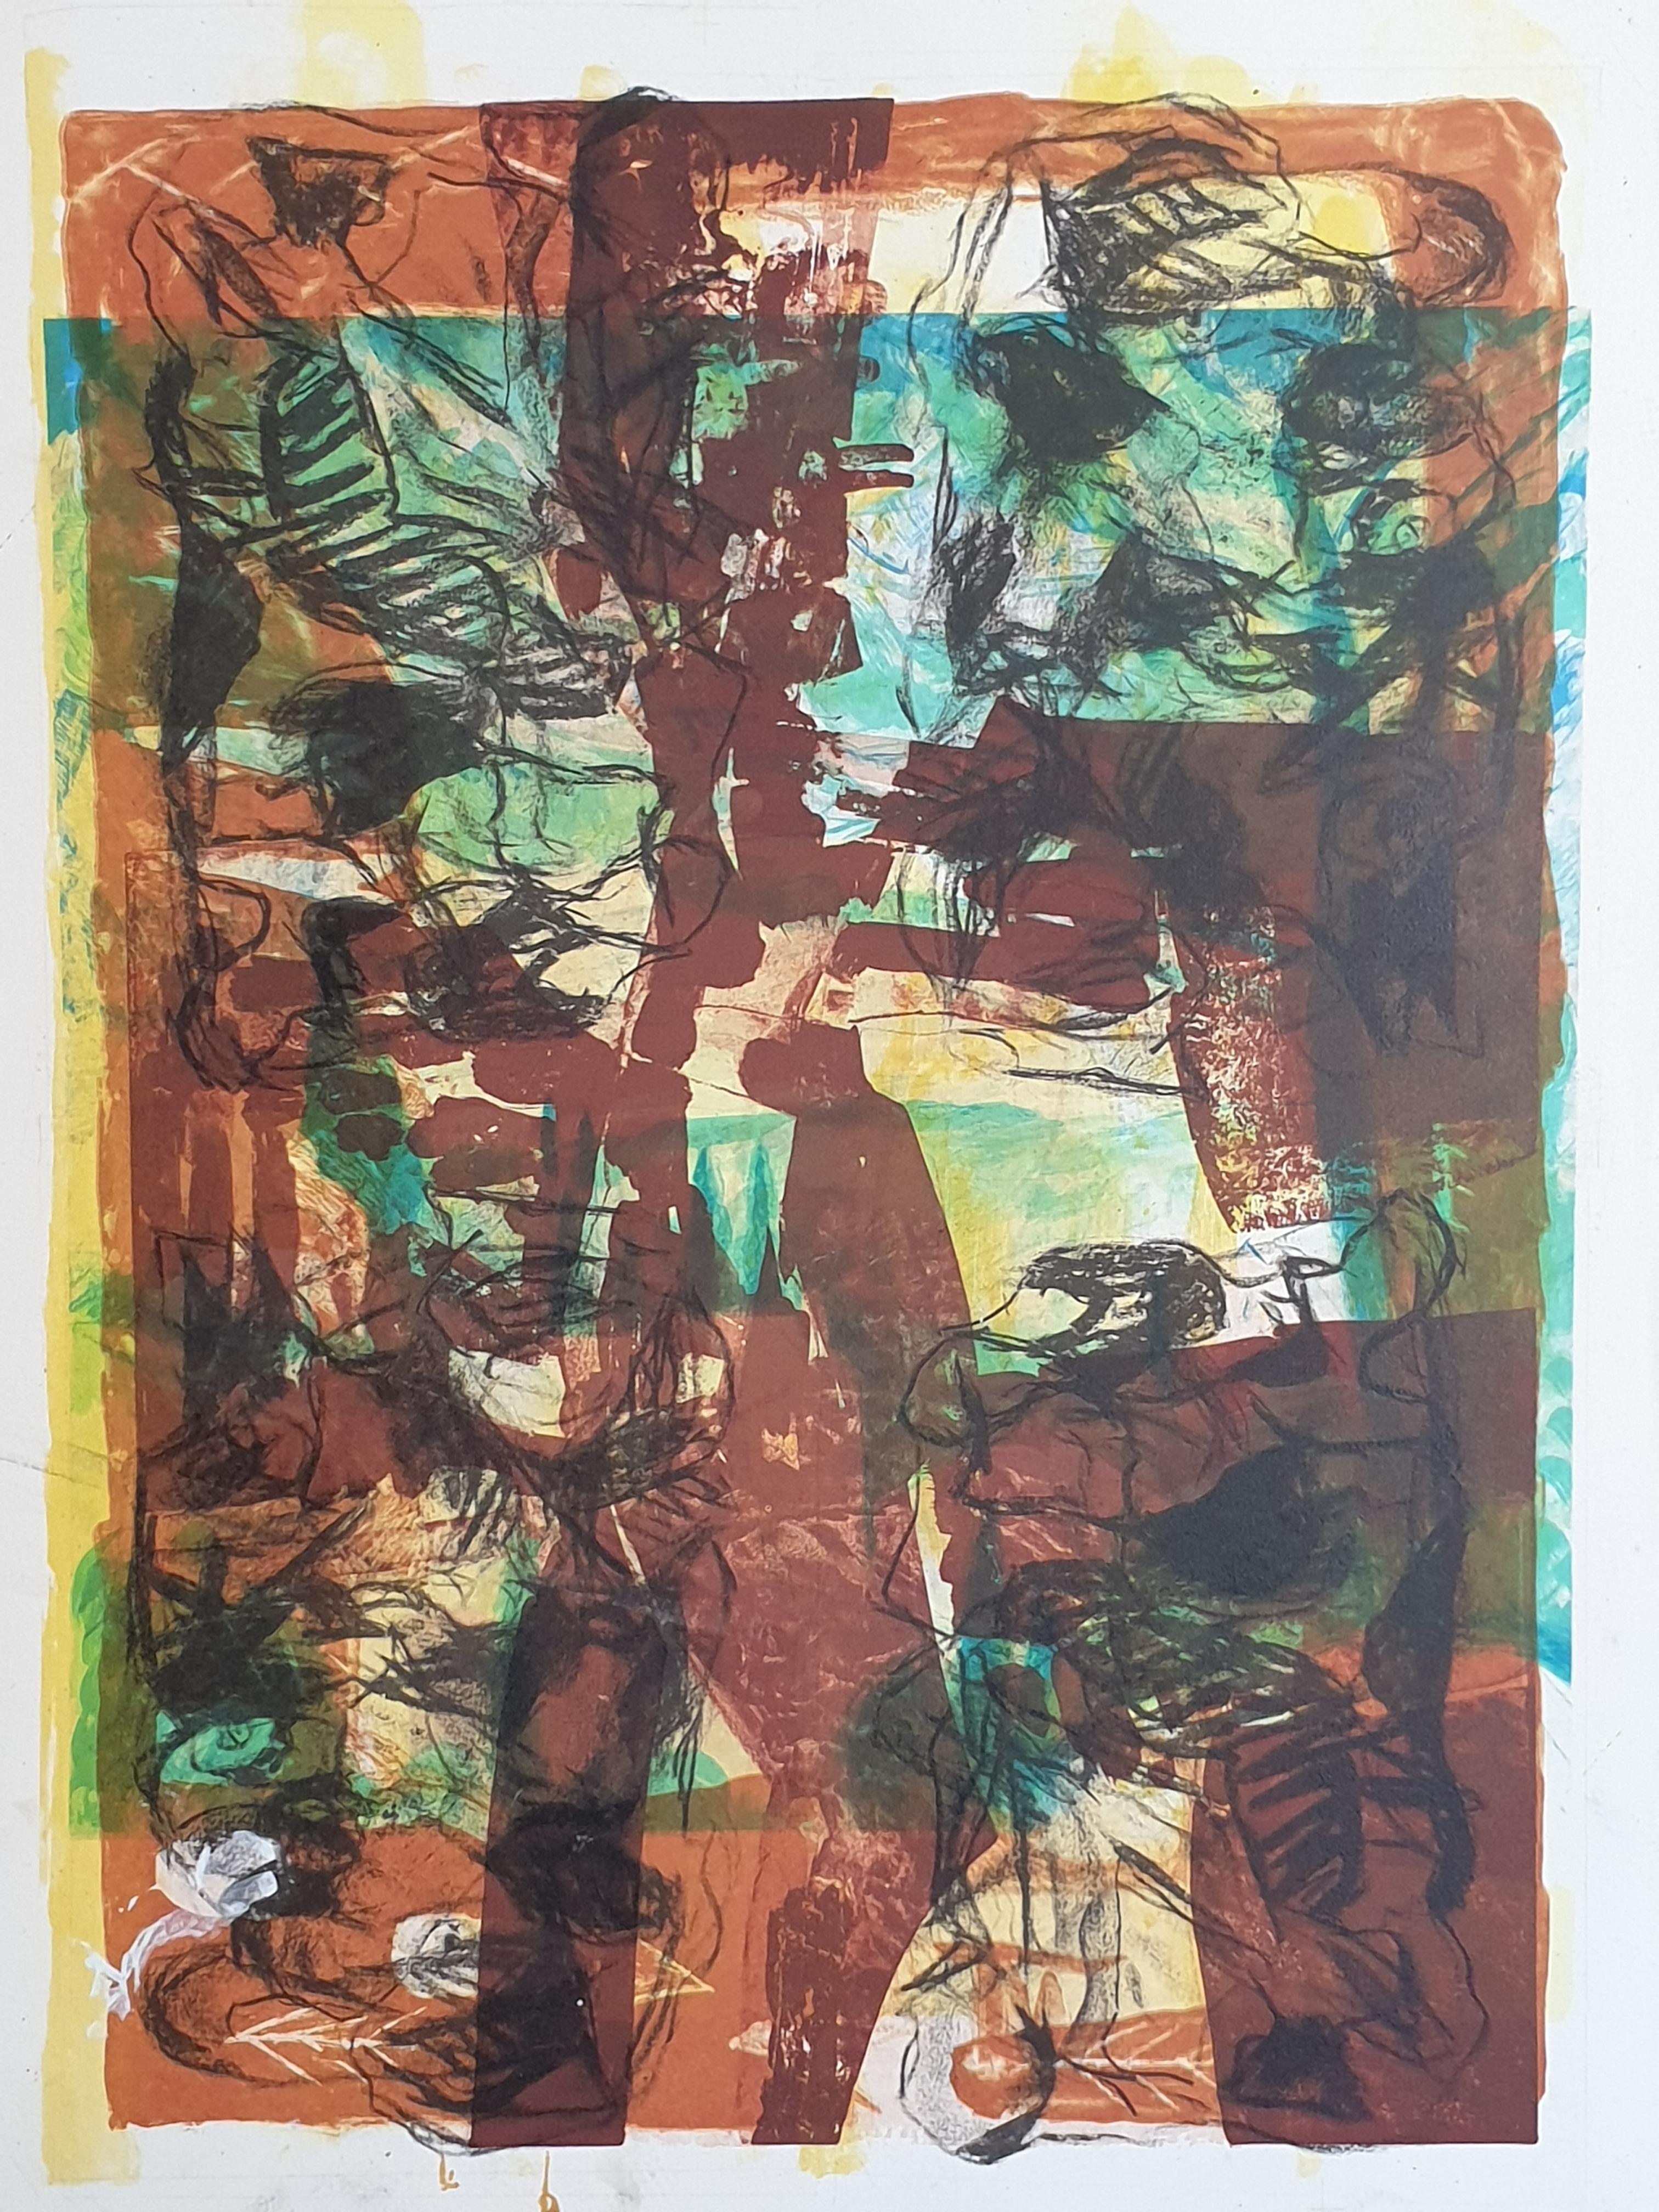 Double Sided Abstract Expressionist Monotypes on Handmade Paper. - Print by Martin Engelman